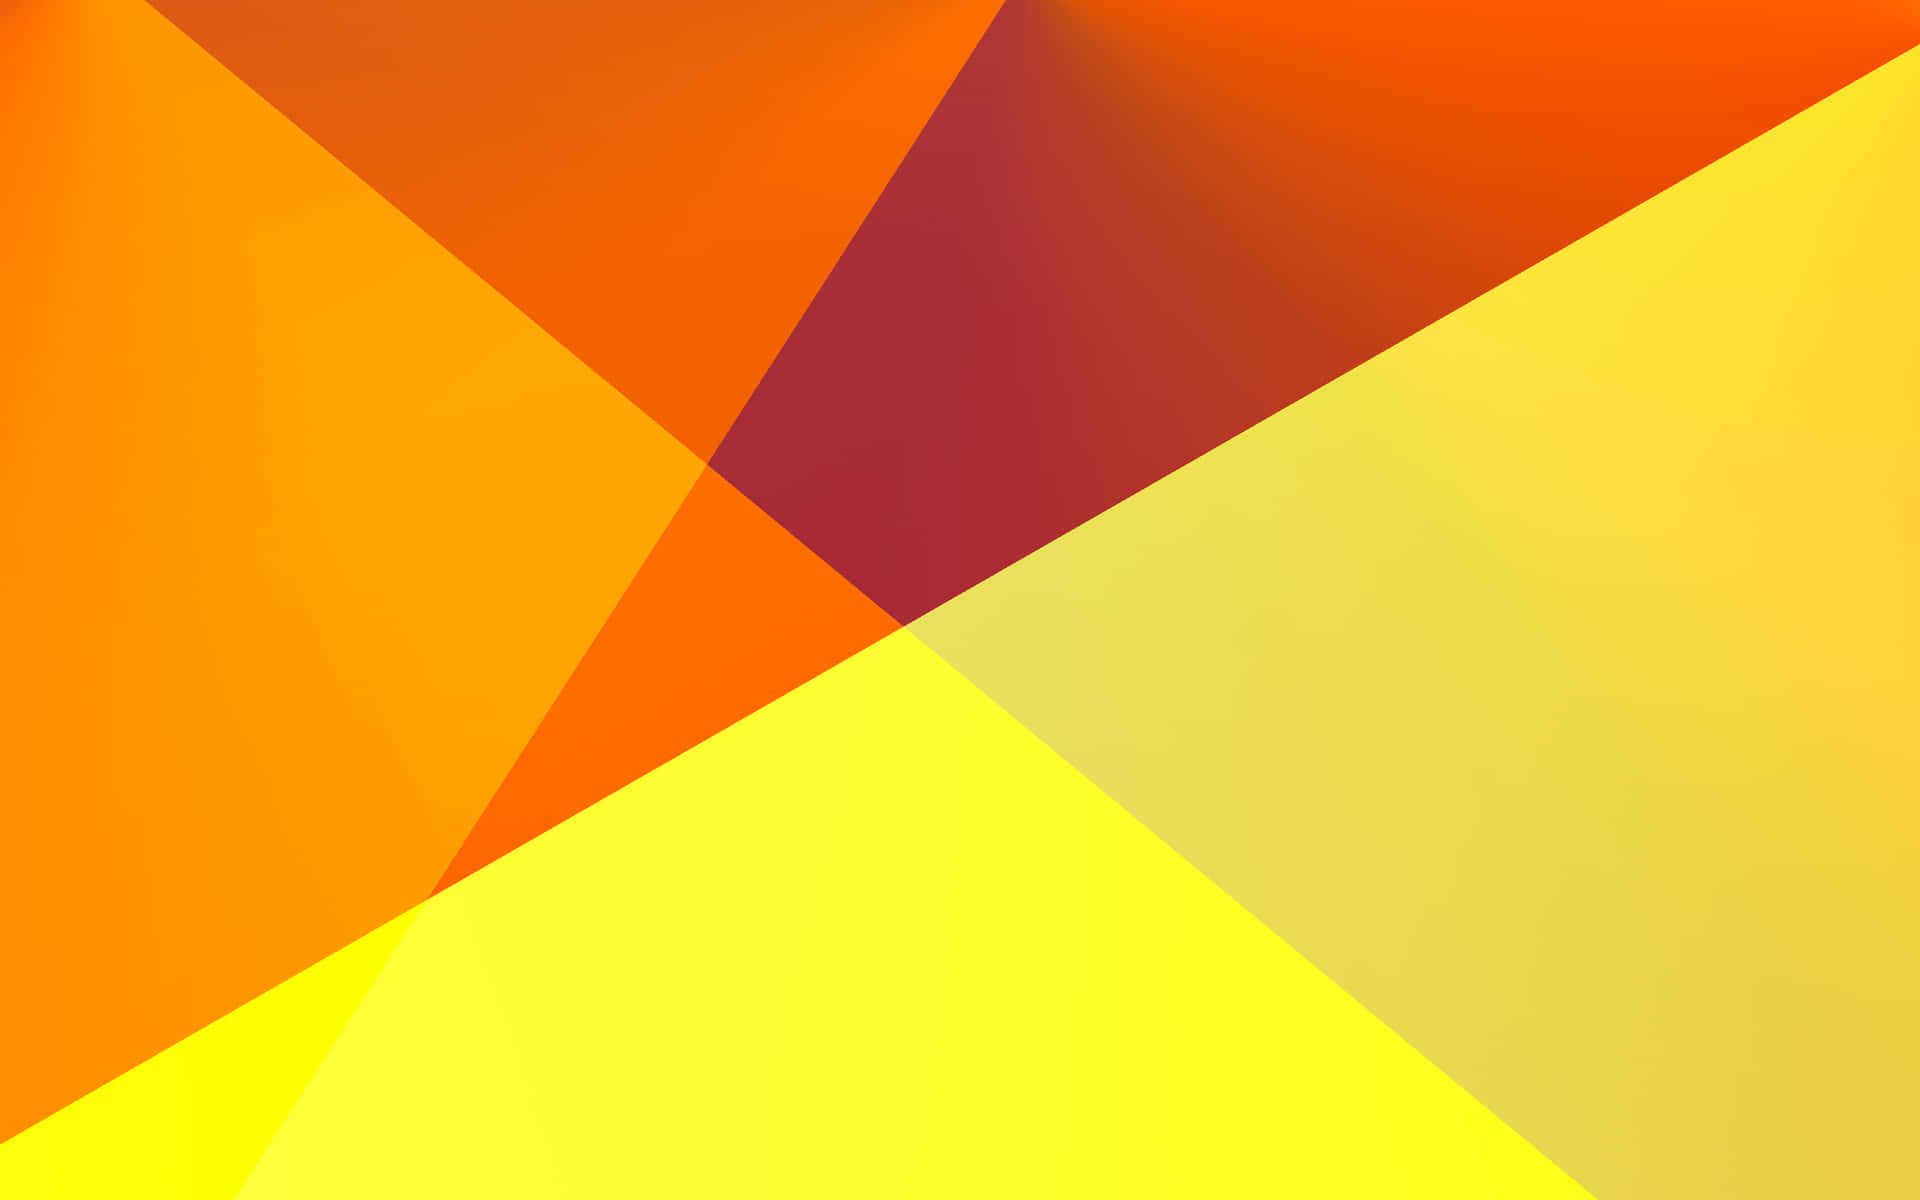 An orange abstract background of creative design